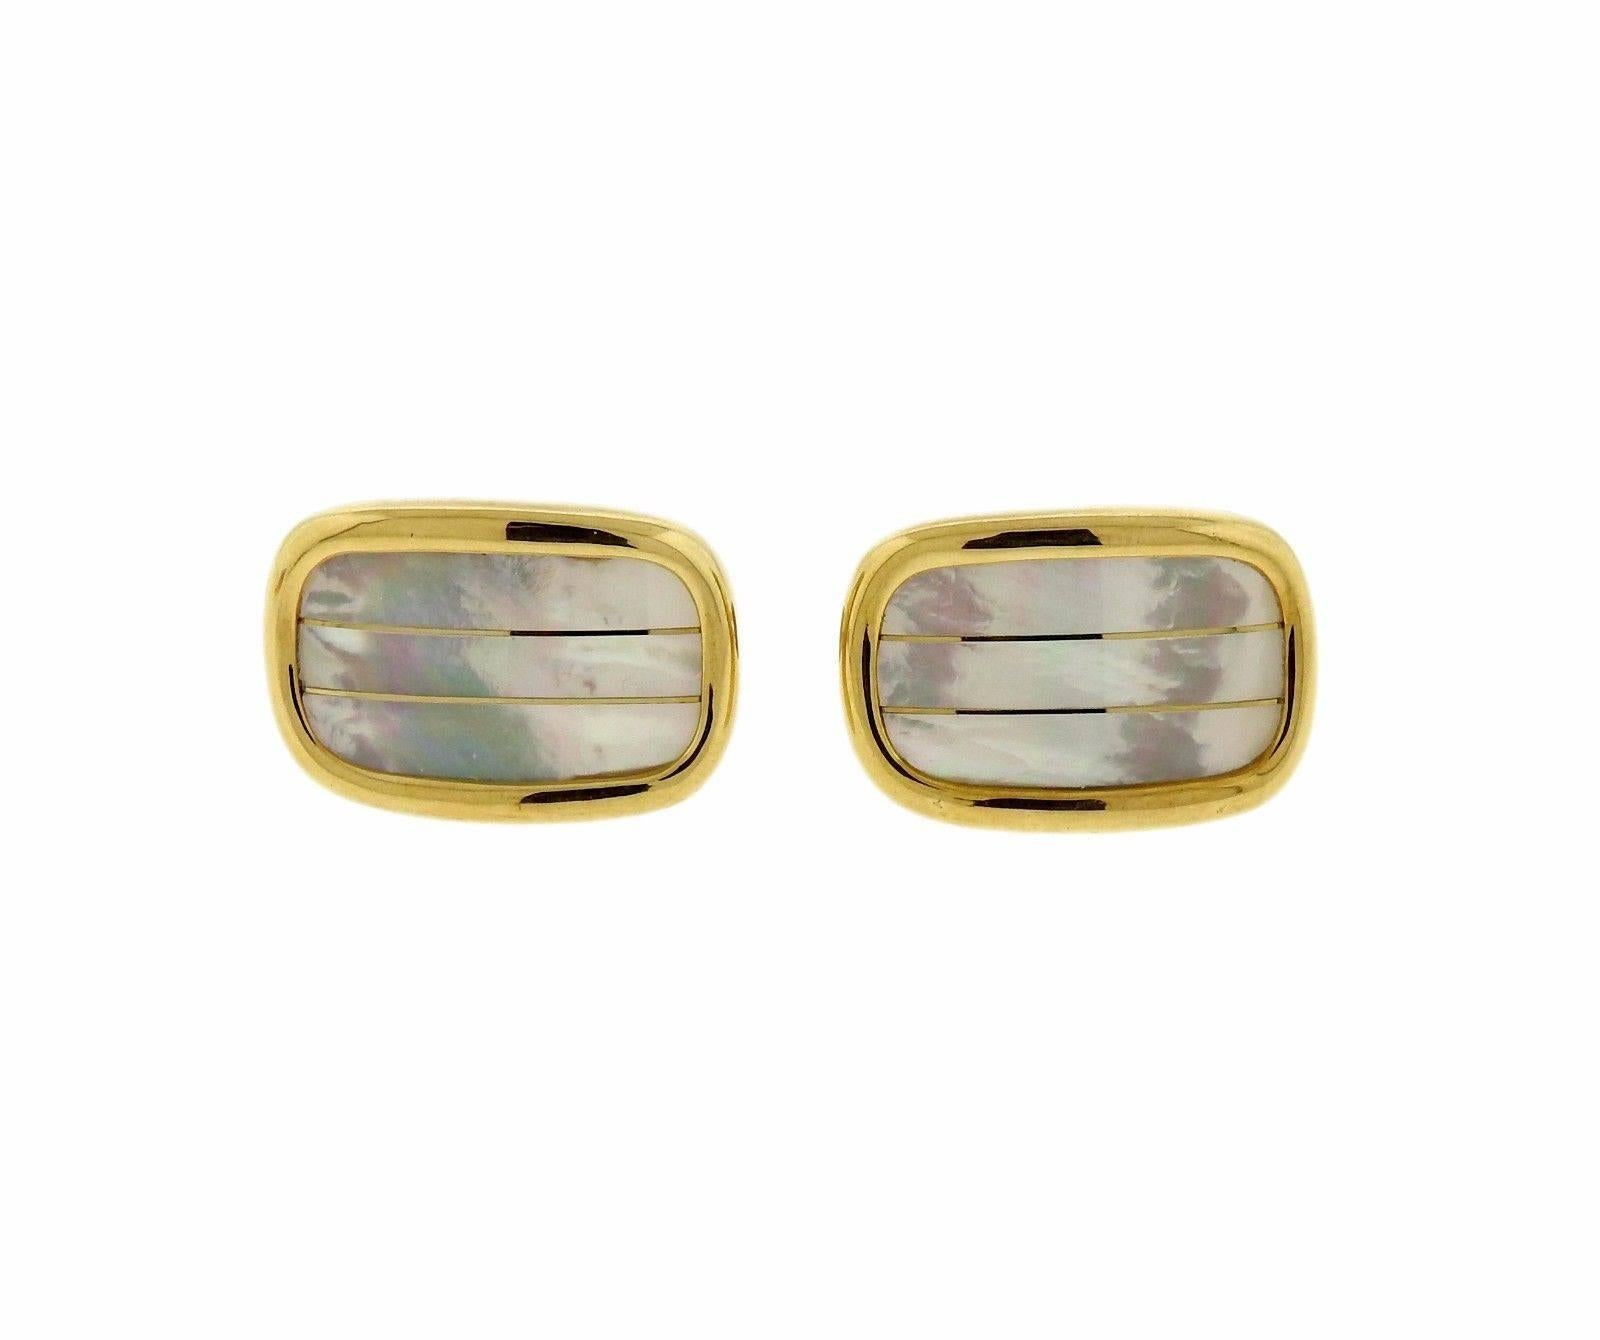 An 18k gold cufflinks and stud set, set with mother of pearl . Cufflink top measures 22mm x 15mm, stud top - 12mm x 8m. Weight of the set - 23.2 grams 